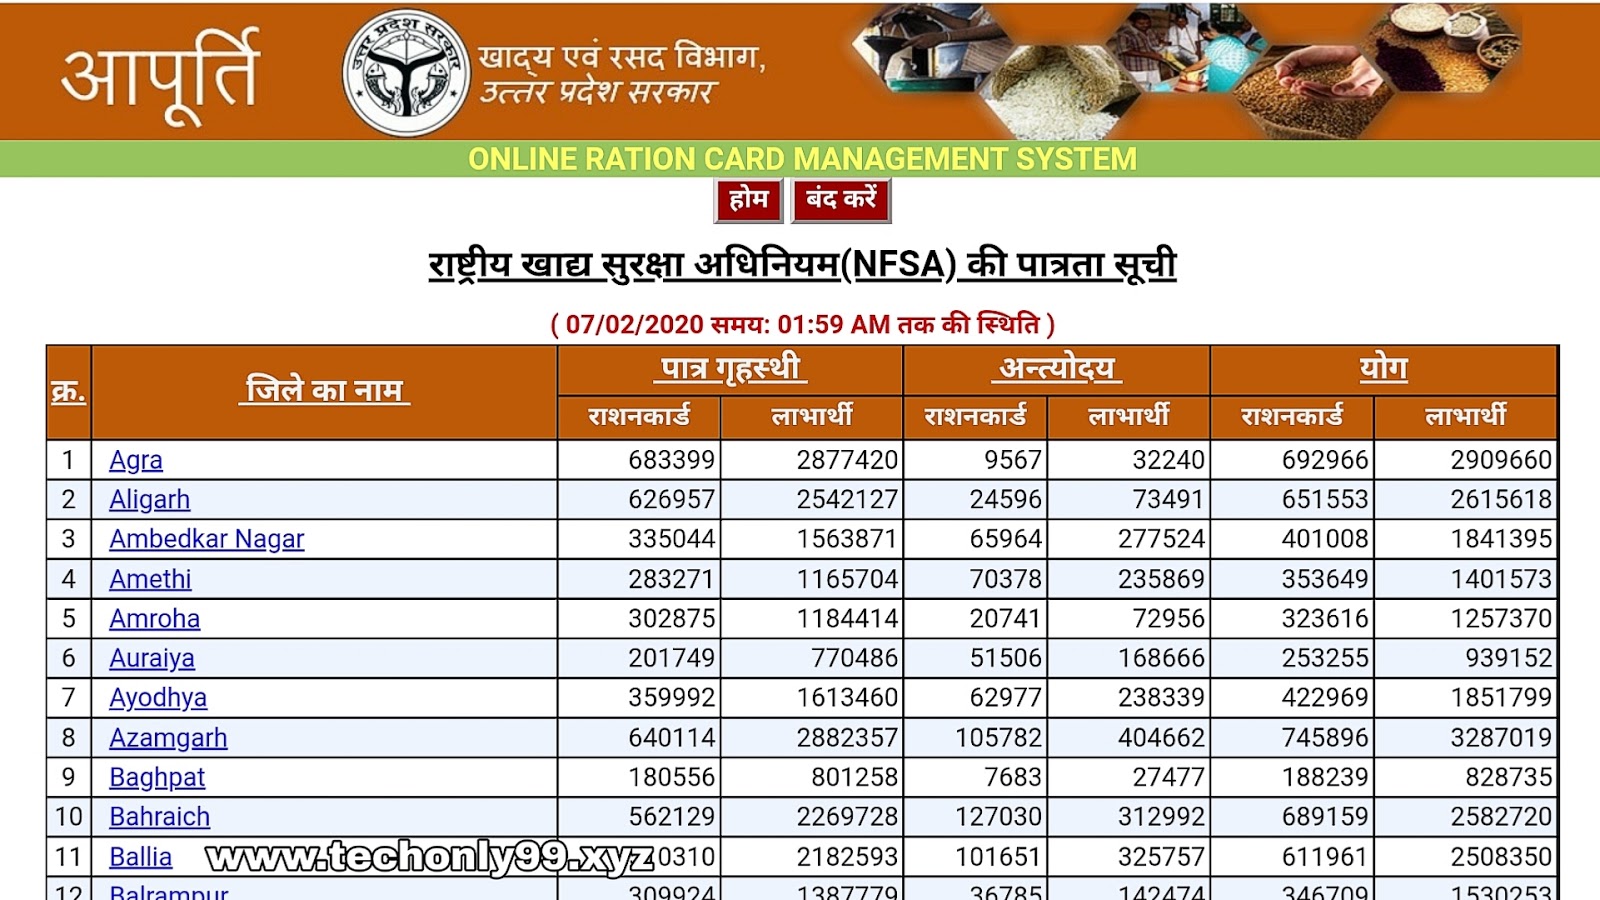 UP New Ration Card List 2020: Download यूपी राशन कार्ड नई सूची 2020 BPL / APL